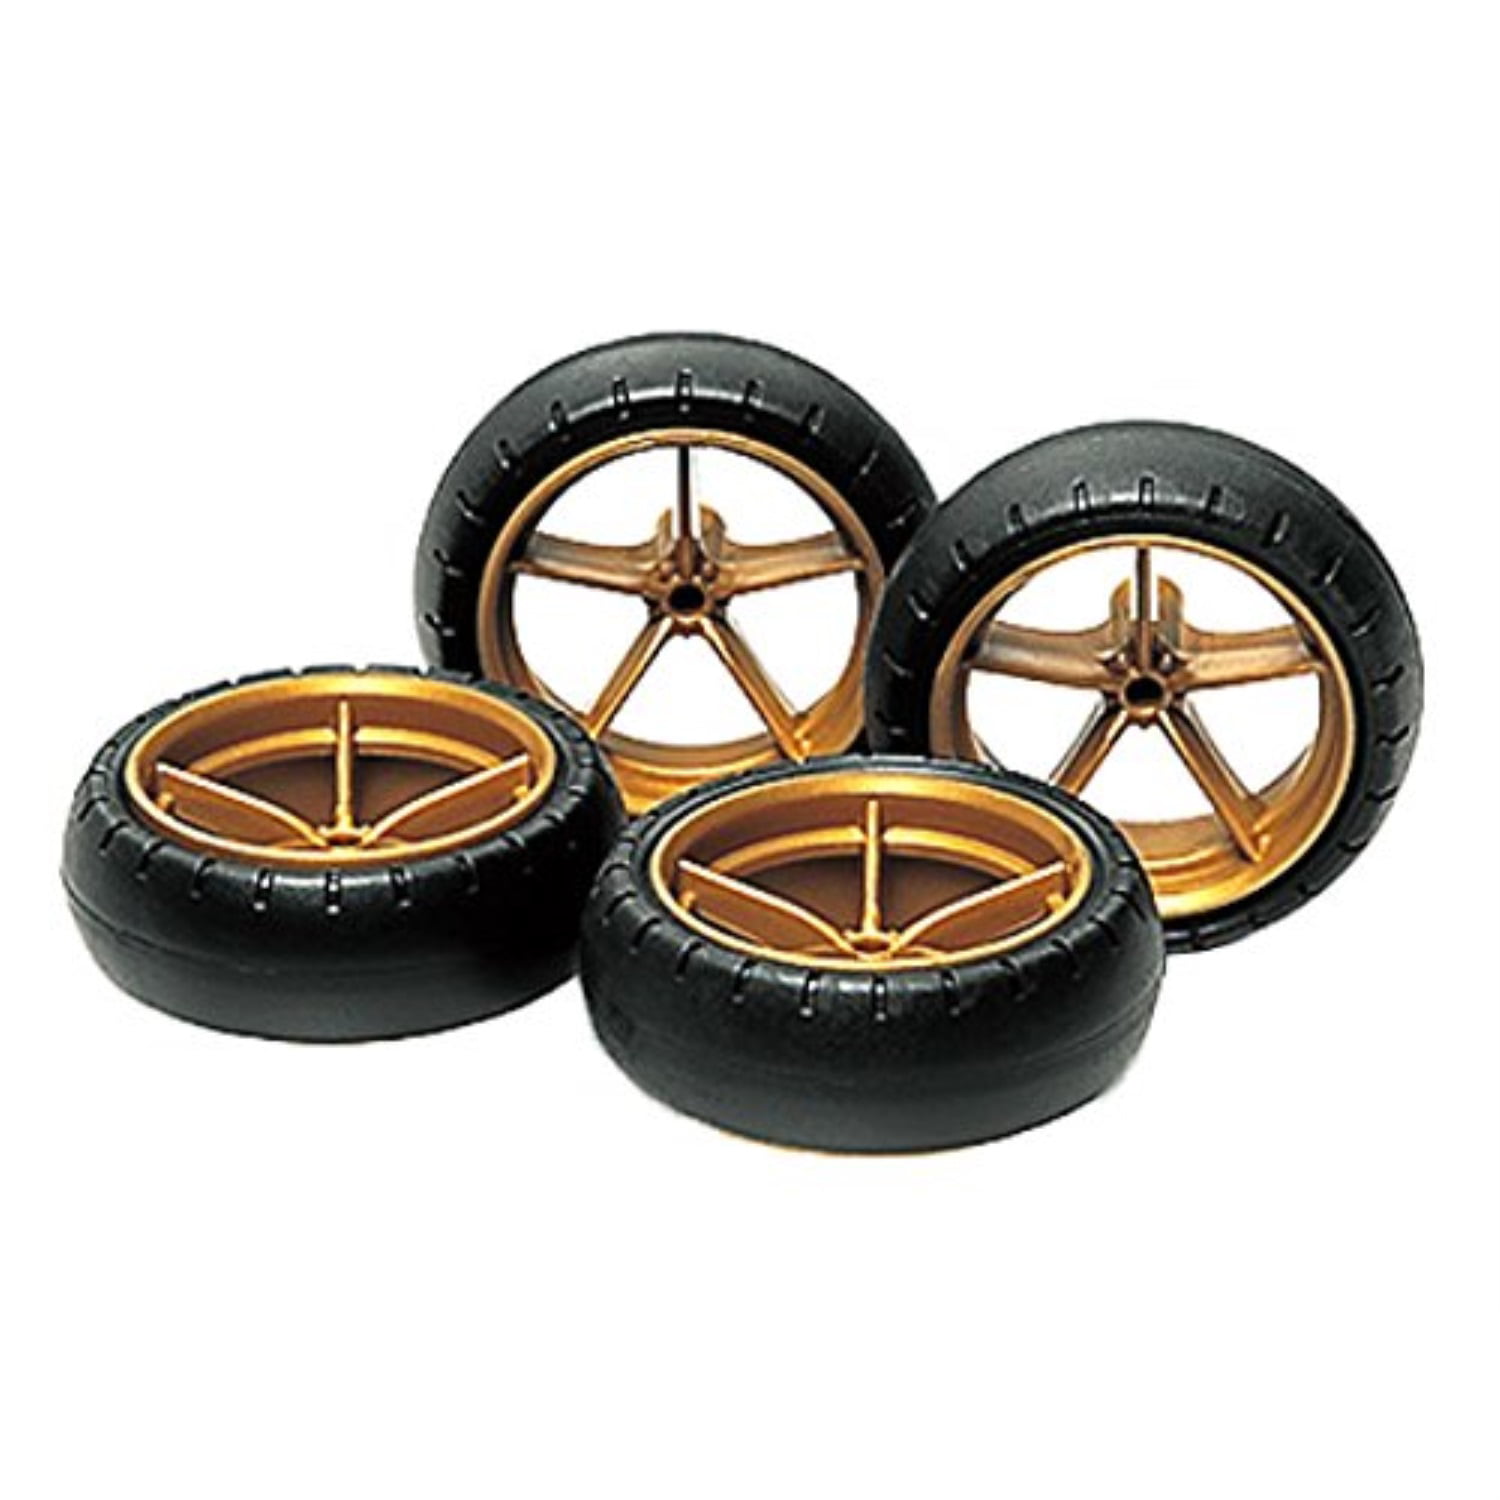 Large Dia Narrow Lightweight Wheels (w/Arched Tires) Mini 4WD Grade Up Parts Series by Tamiya